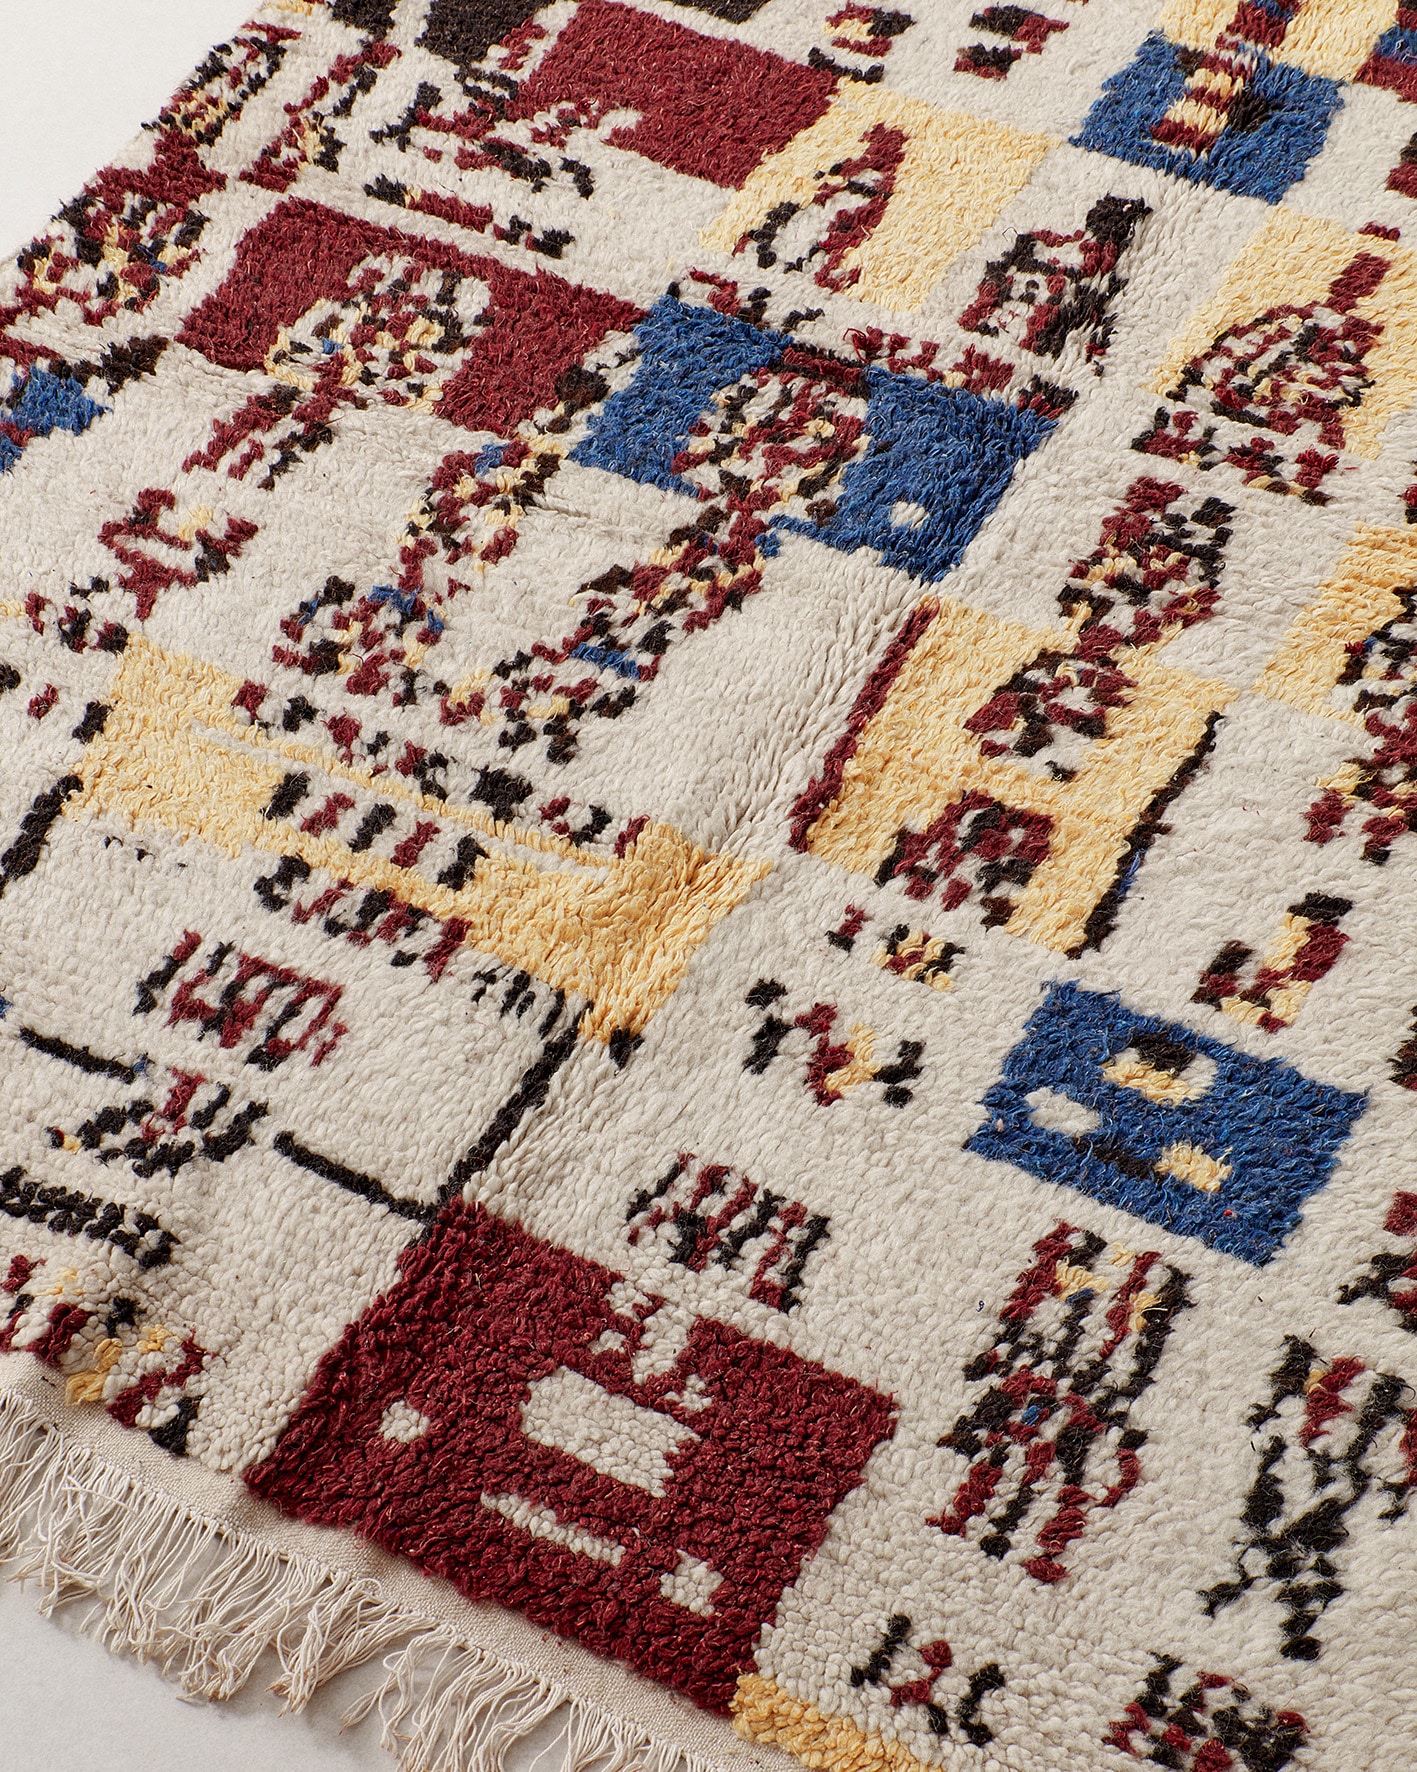 Vintage Berber rug with a tribal design, texture